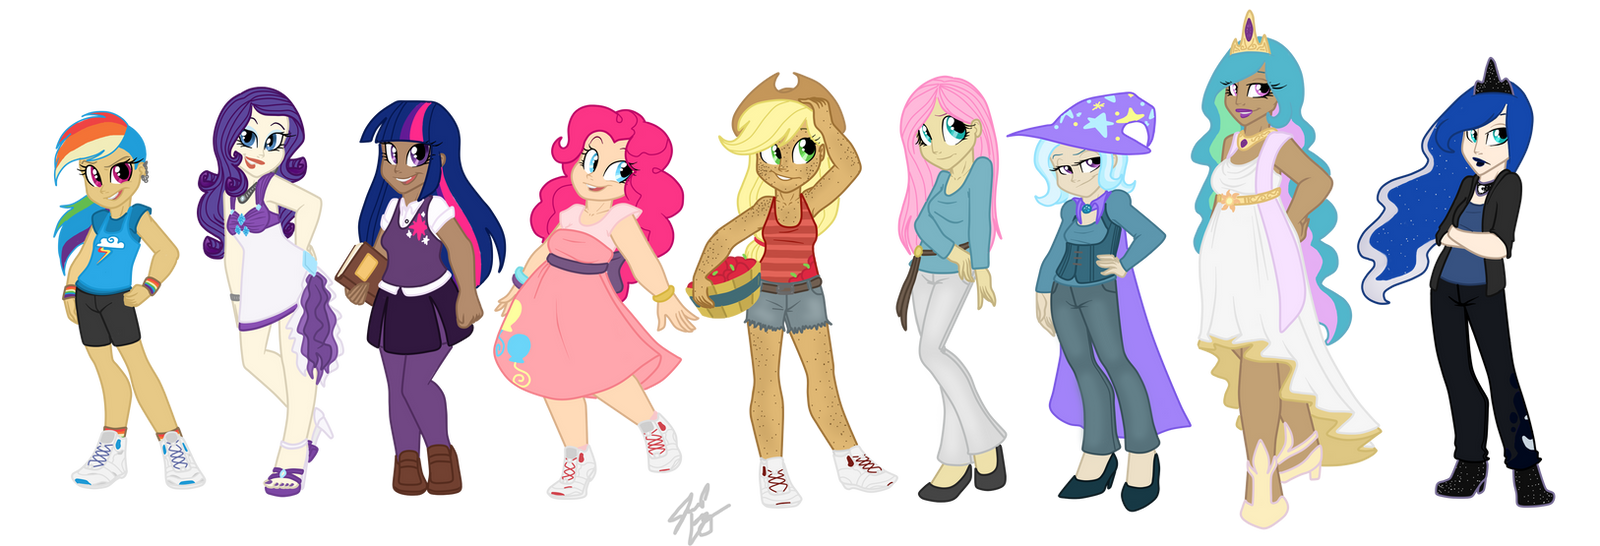 equestria_girls_by_alittleriddle-d5v3y8e.png